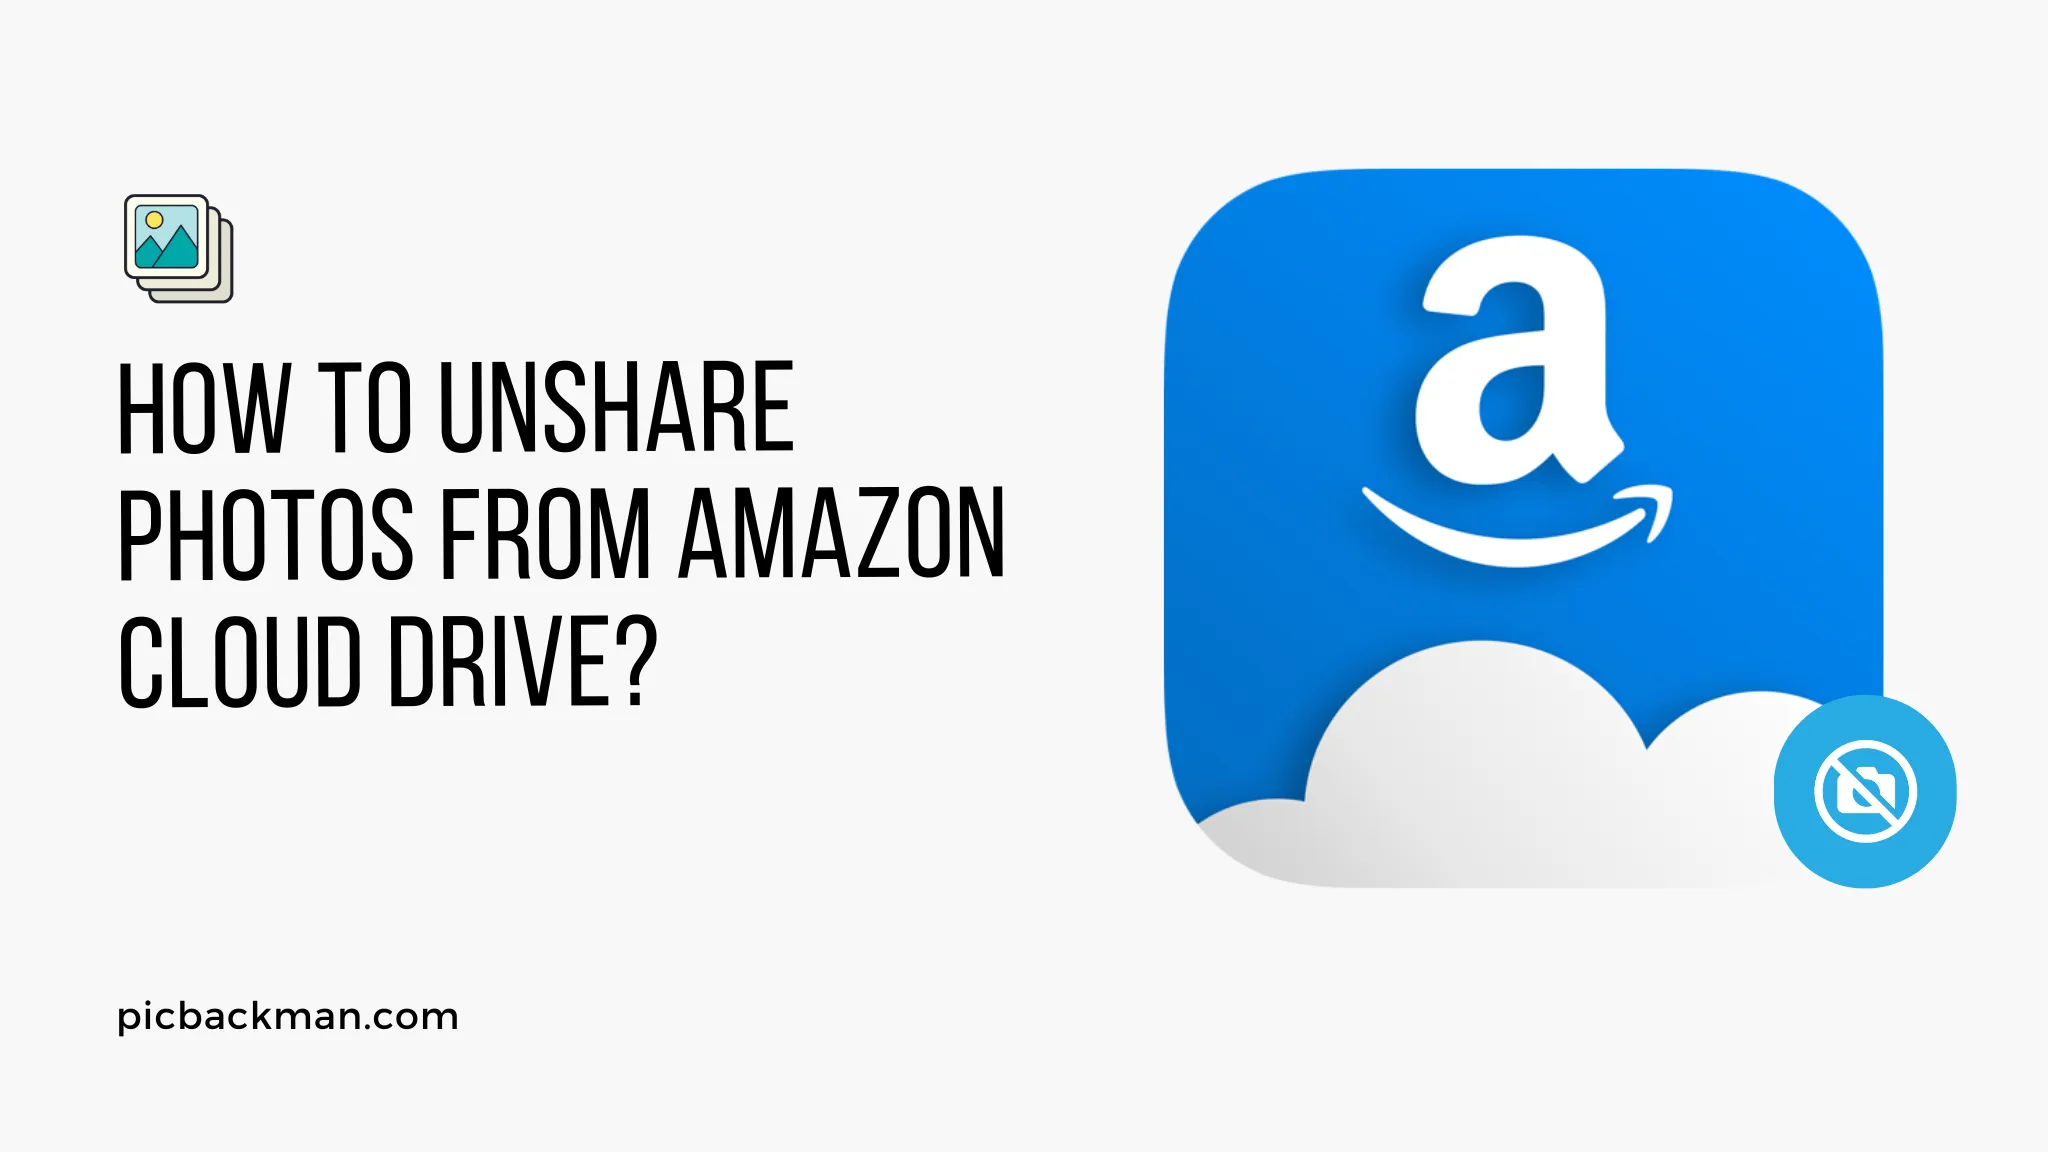 How to Unshare Photos from Amazon Cloud Drive?